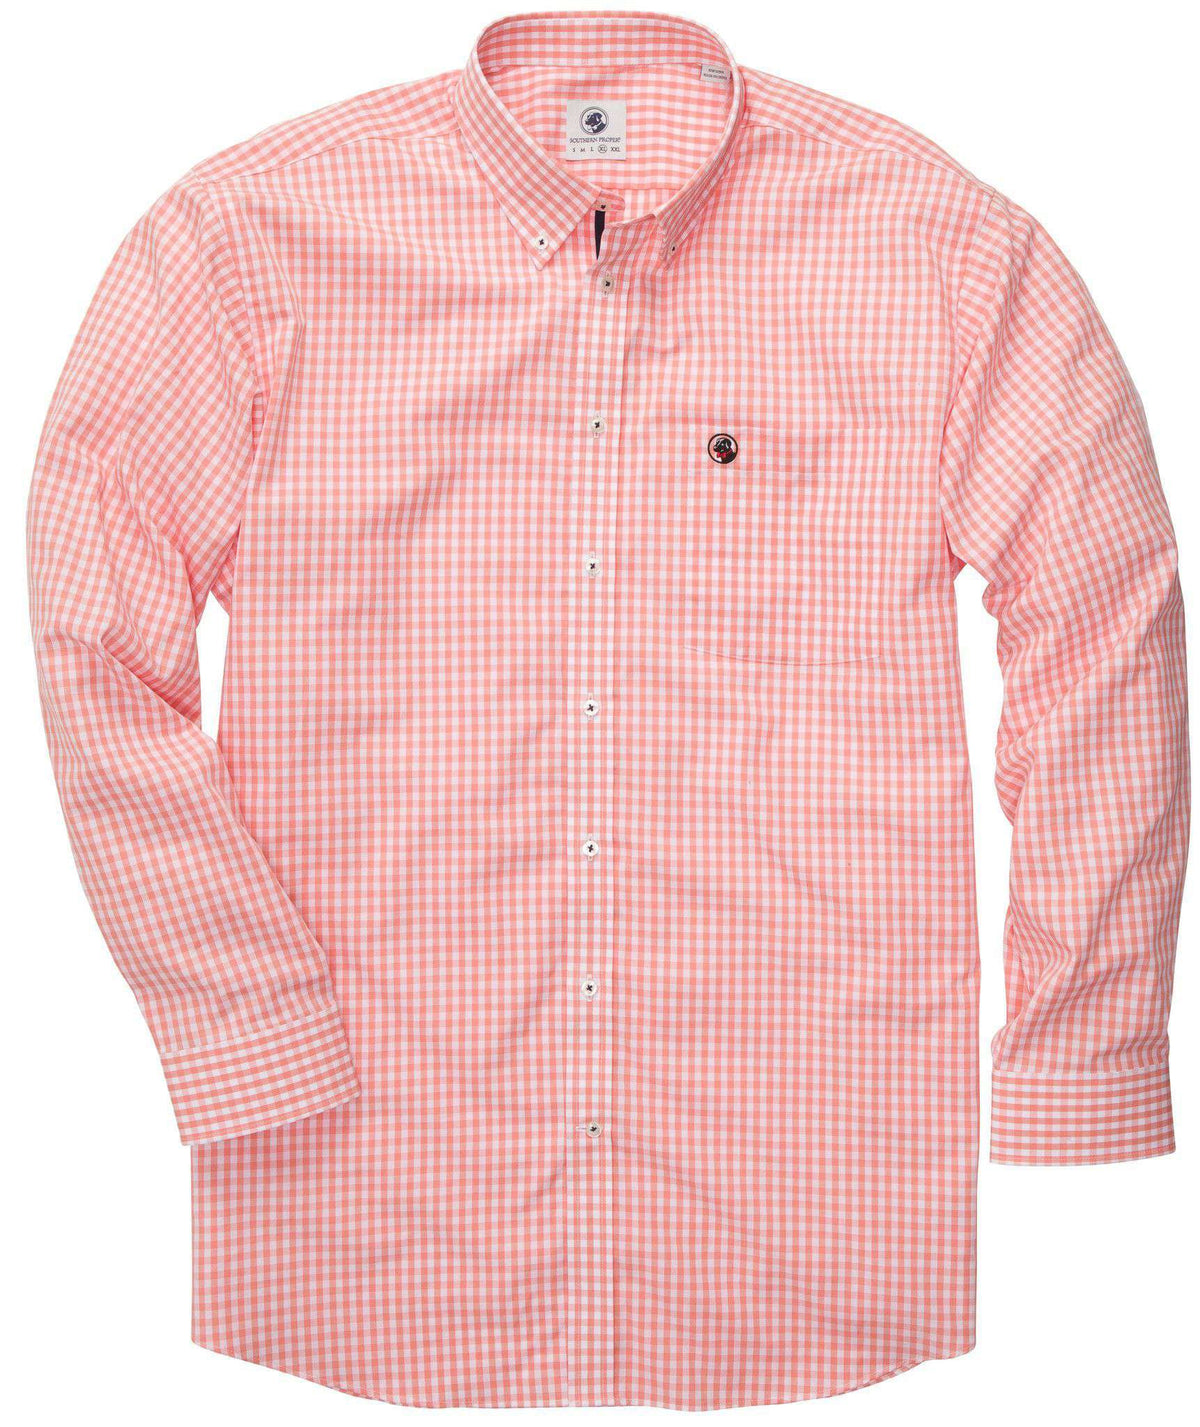 Goal Line Shirt in Salmon Gingham by Southern Proper - Country Club Prep